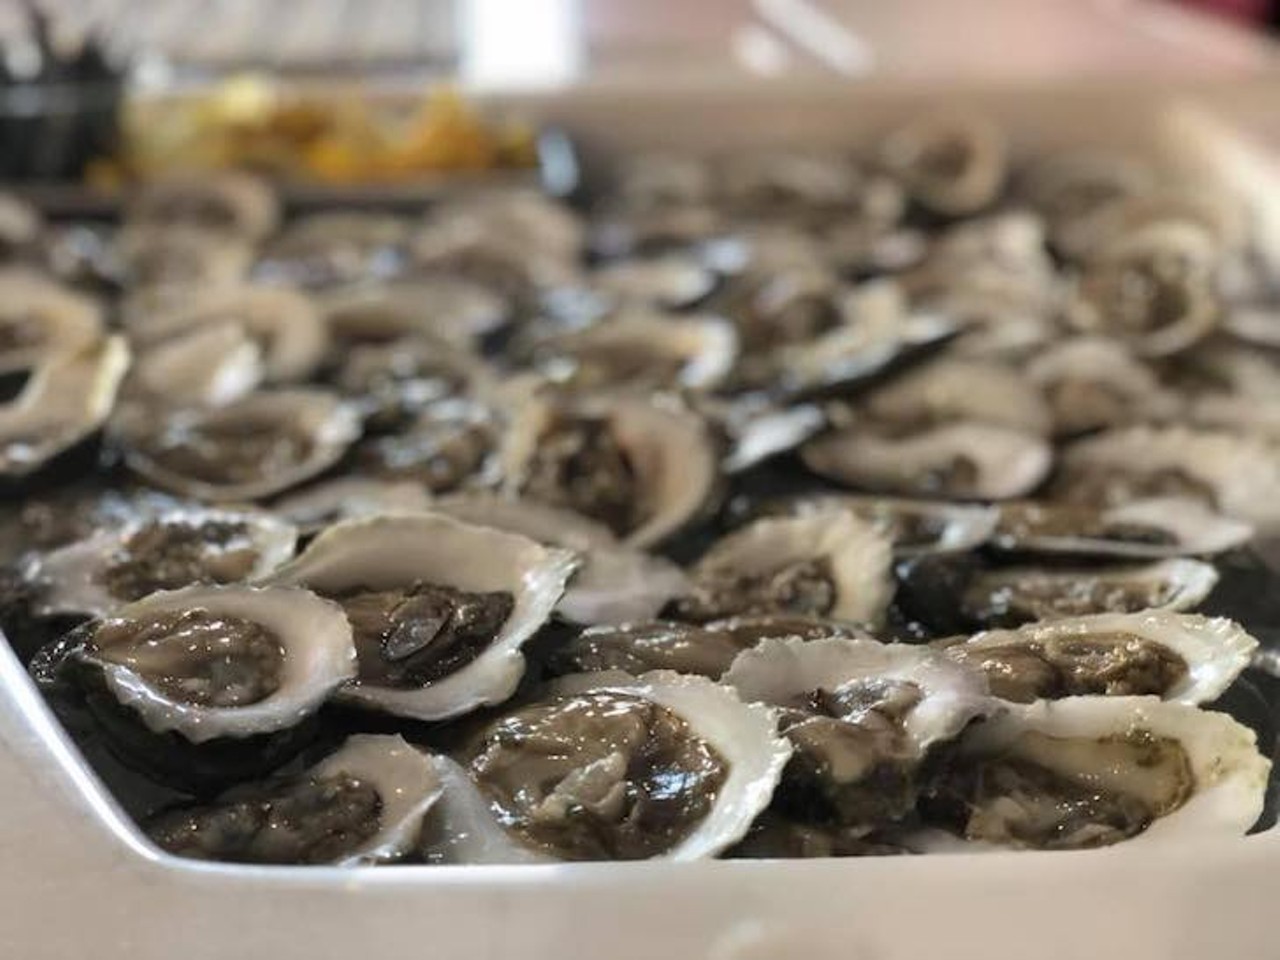 The Oyster Shucker Craft & Draft  
650 Corey Ave., St. Pete, 727-256-1882 
St. Pete Beach's Oyster Shucker has reopened as Oyster Shucker Craft & Draft! They&#146;re serving up everything in an atmosphere that's more sophisticated than what came before it. 
Photo via Clearwater Oyster Company/Facebook